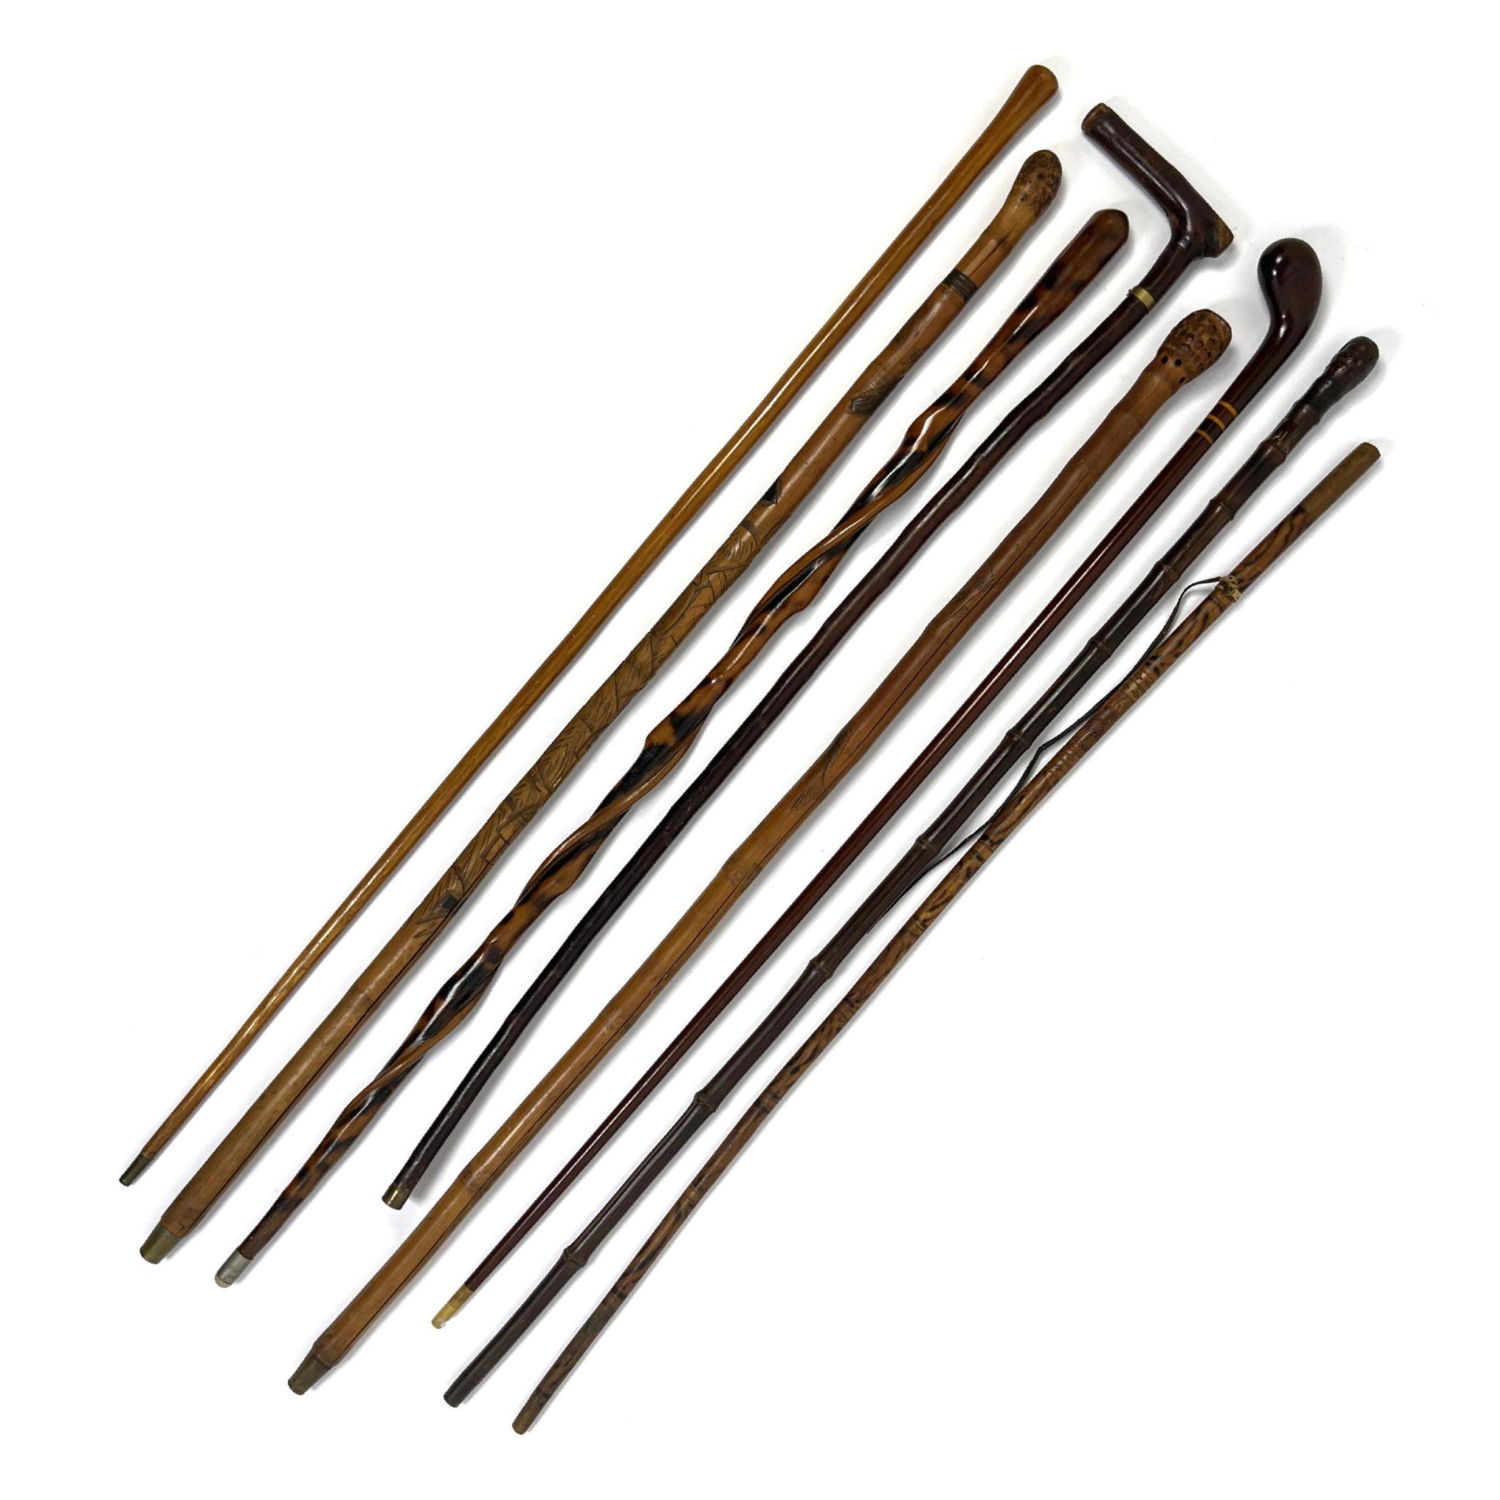 8pcs Vintage Canes and Walking